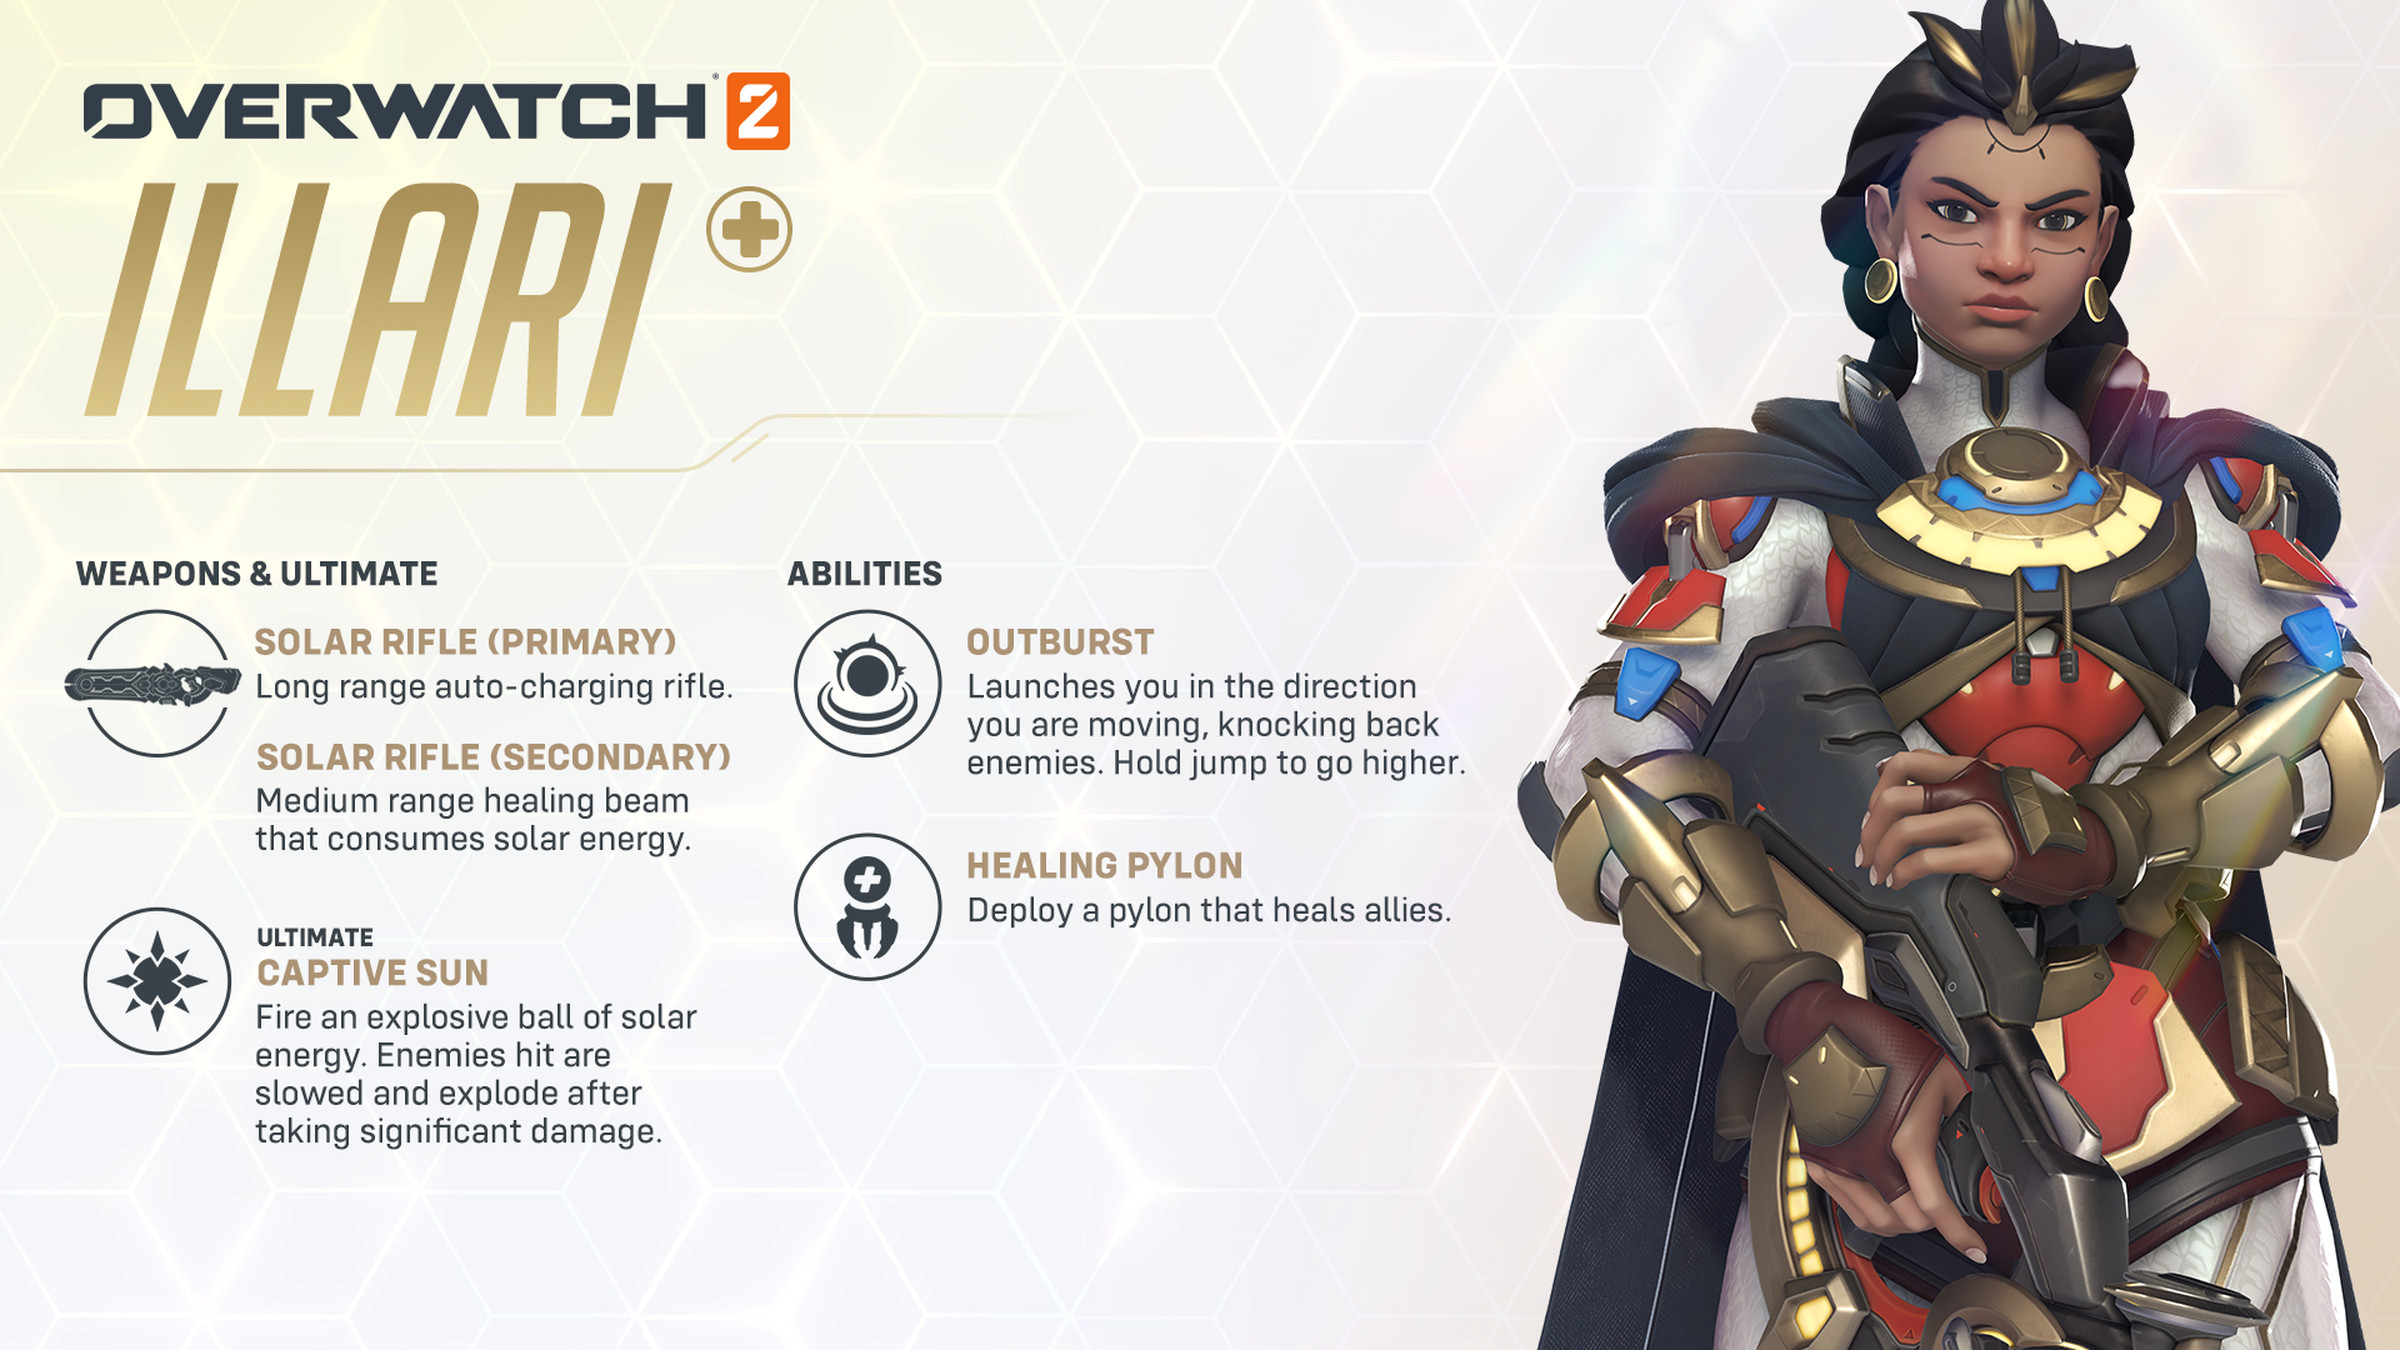 Image from Overwatch 2 featuring new support hero Illari &amp; her abilities. Weapons &amp; Ultimate: Solar Rifle Long rage auto-charing rifle. Solar Rifle Medium range healing beam that consumes solar energy. Ultimate Captive Sun: Fire an explosive ball of solar energy. Enemies hit are slowed and explode after taking significant damage. Abilities Outburst: Launches you in the direction you are moving, knocking back enemies. Hold jump to go higher. Healing Pylon: Deploy a pylon that heals allies